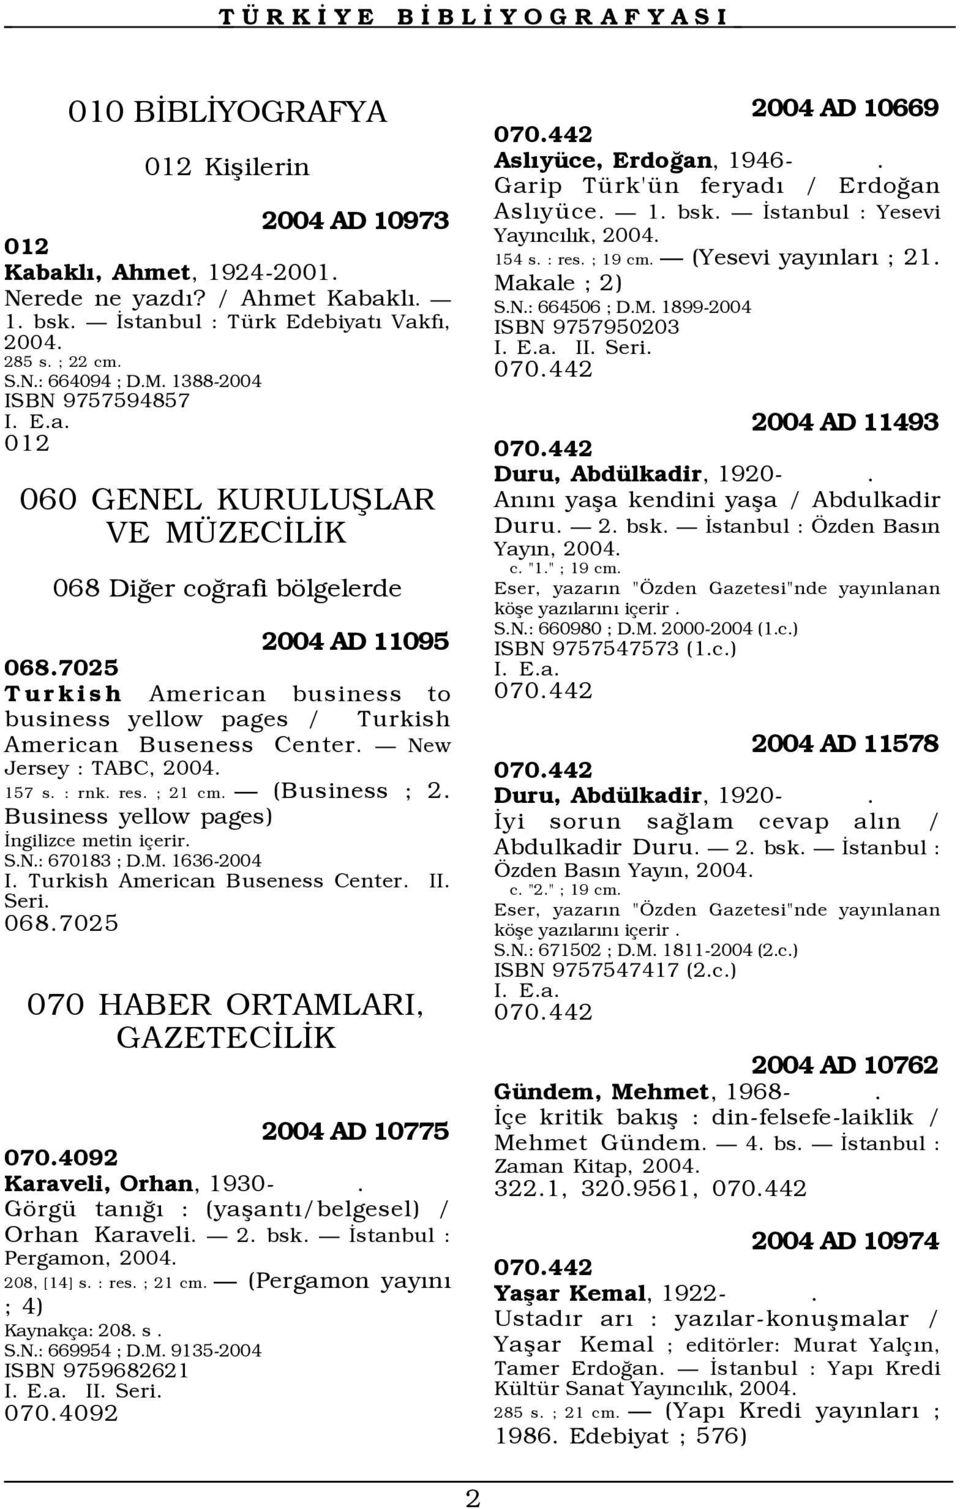 7025 Turkish American business to business yellow pages / Turkish American Buseness Center. New Jersey : TABC, 2004. 157 s. : rnk. res. ; 21 cm. (Business ; 2.